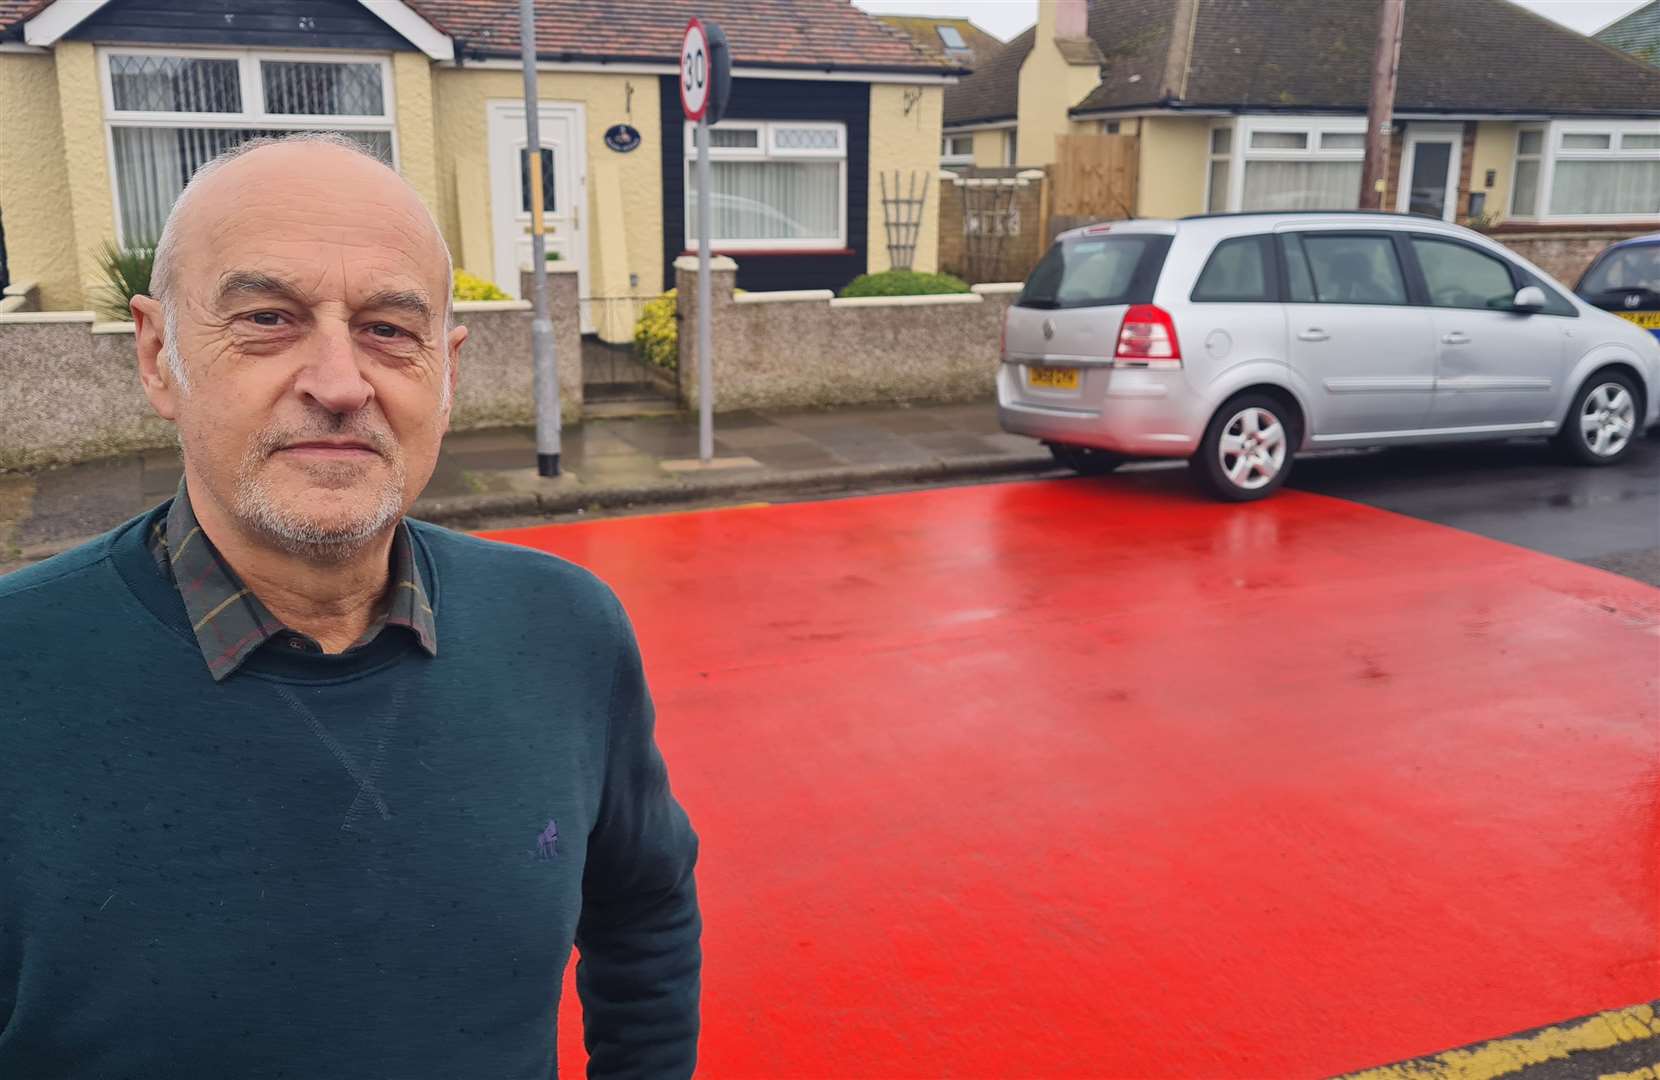 Retired policeman John Sheering says the 20mph red warning markings outside his home are unnecessarily excessive